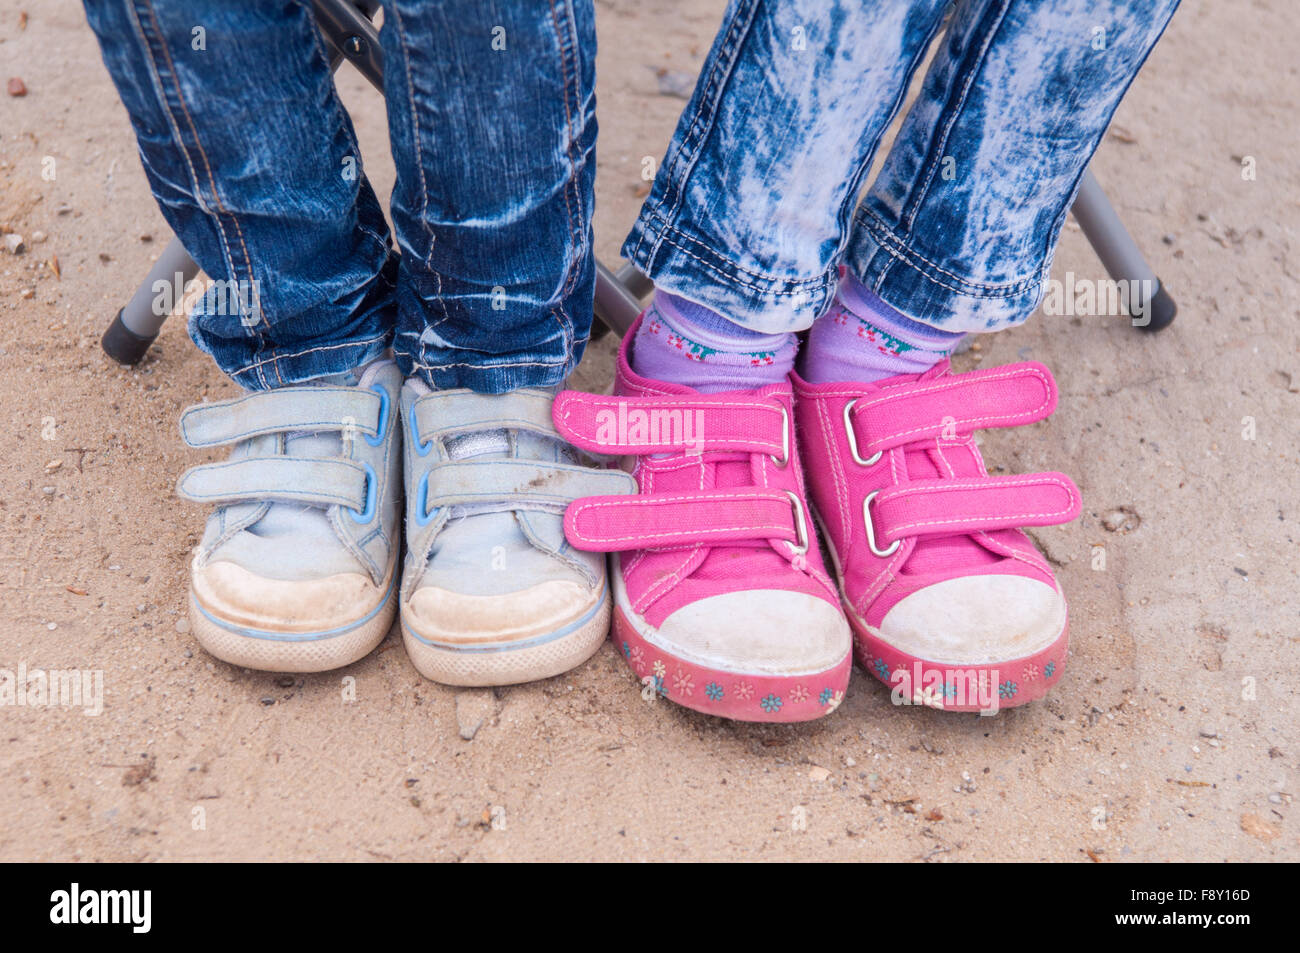 close-up of two pairs of children's feet girls dressed in jeans and sneakers  Stock Photo - Alamy